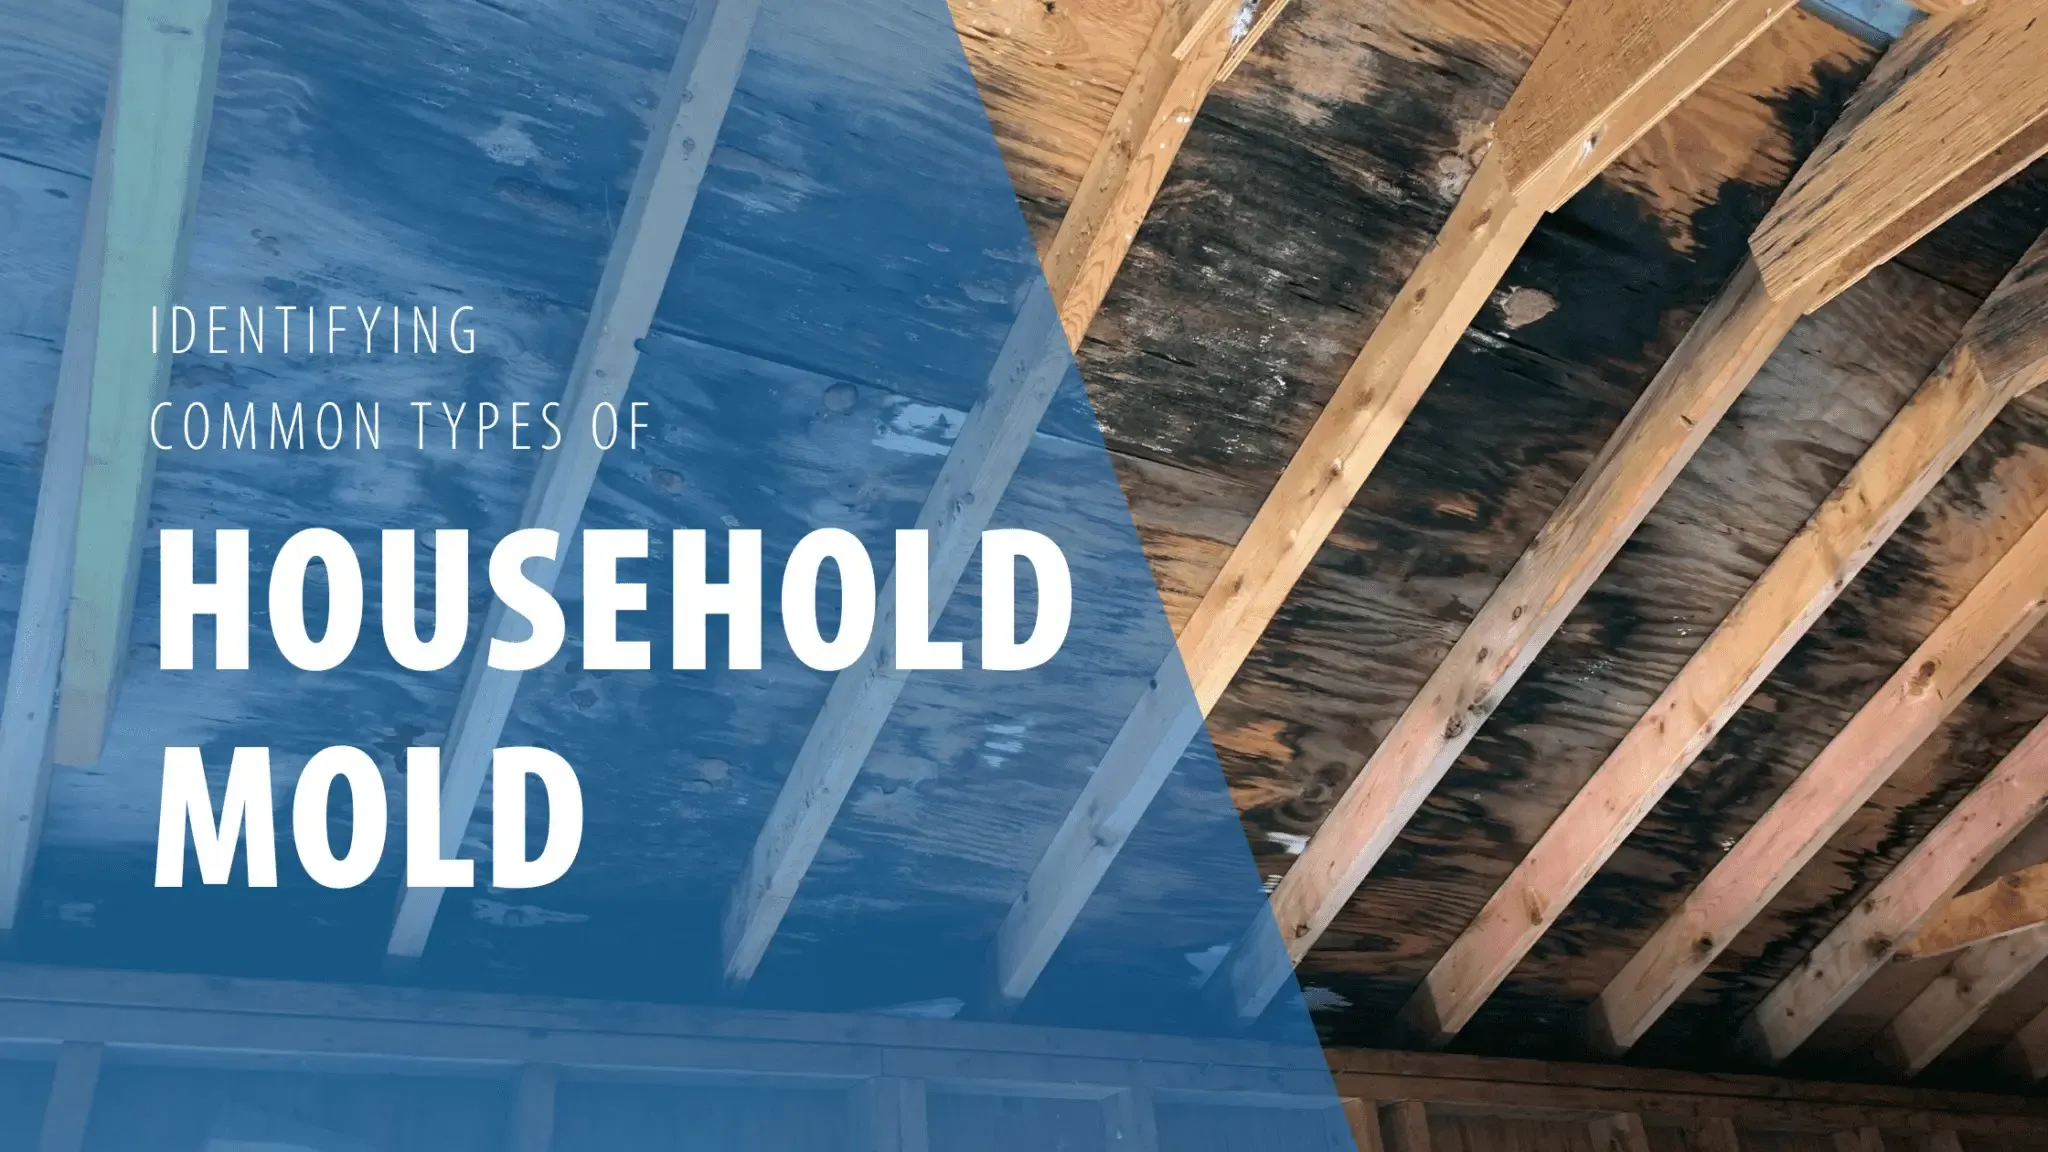 Identifying Common Types of Household Mold